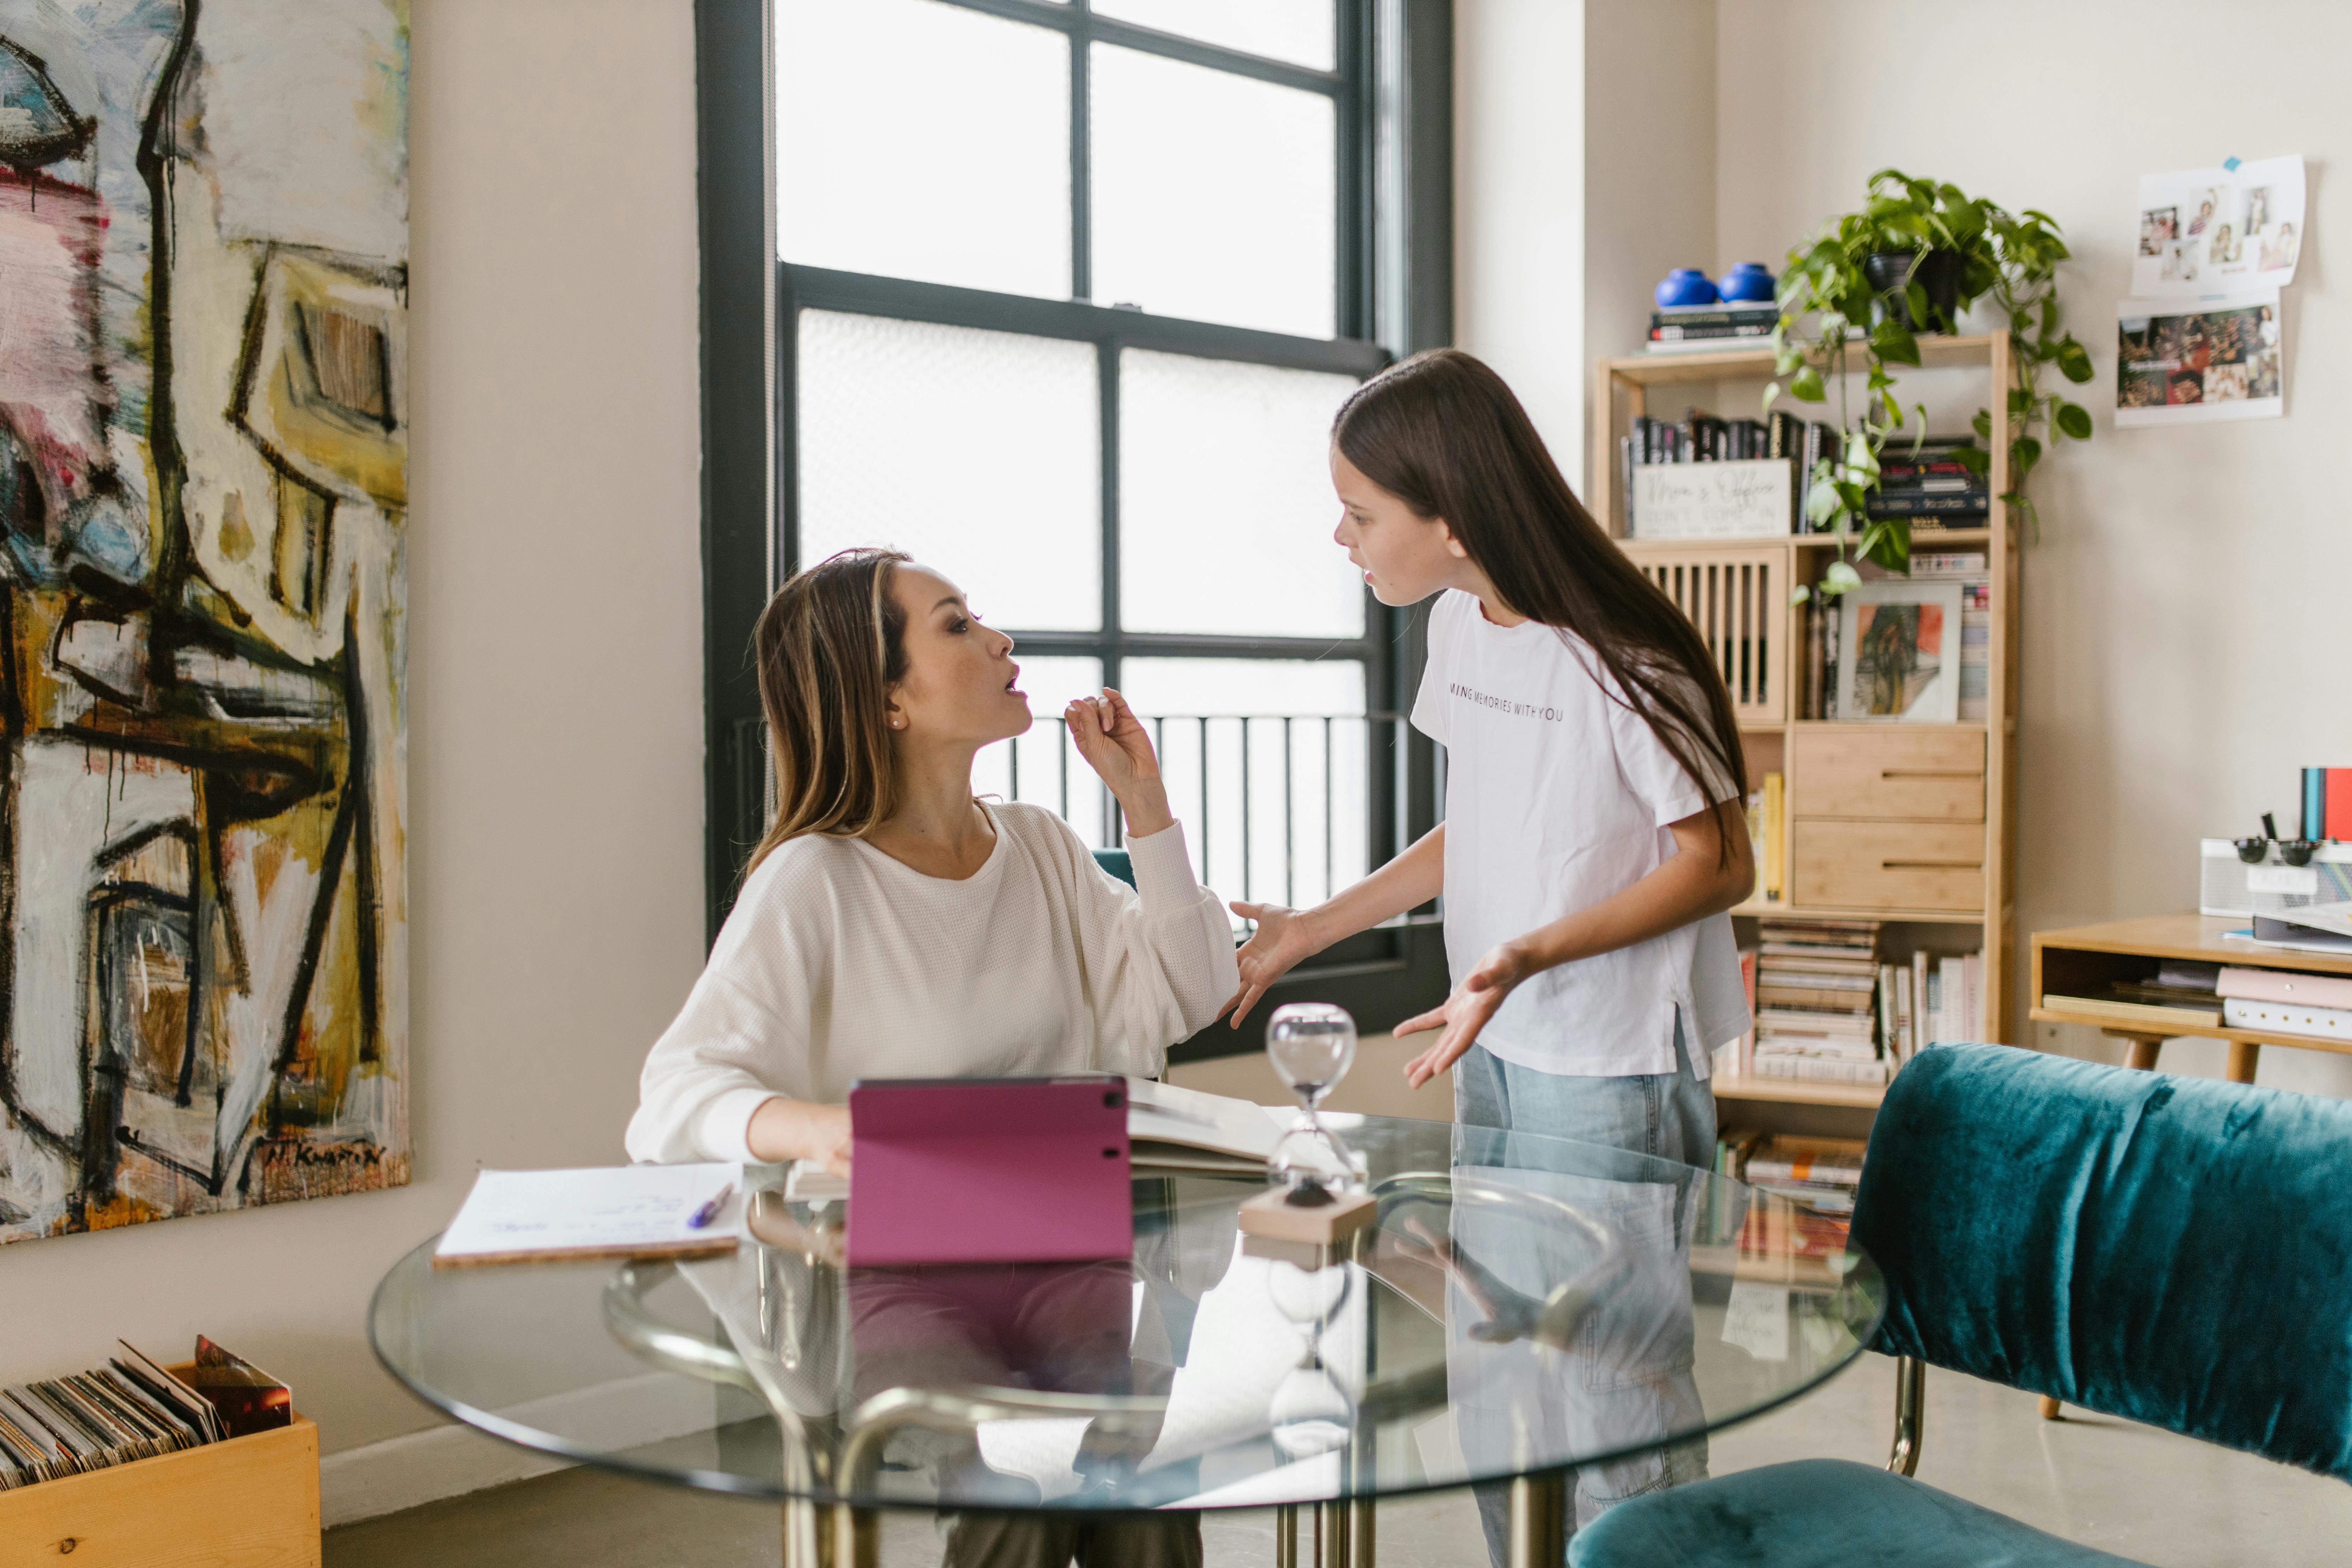 Mom and daughter having an argument | Source: Pexels